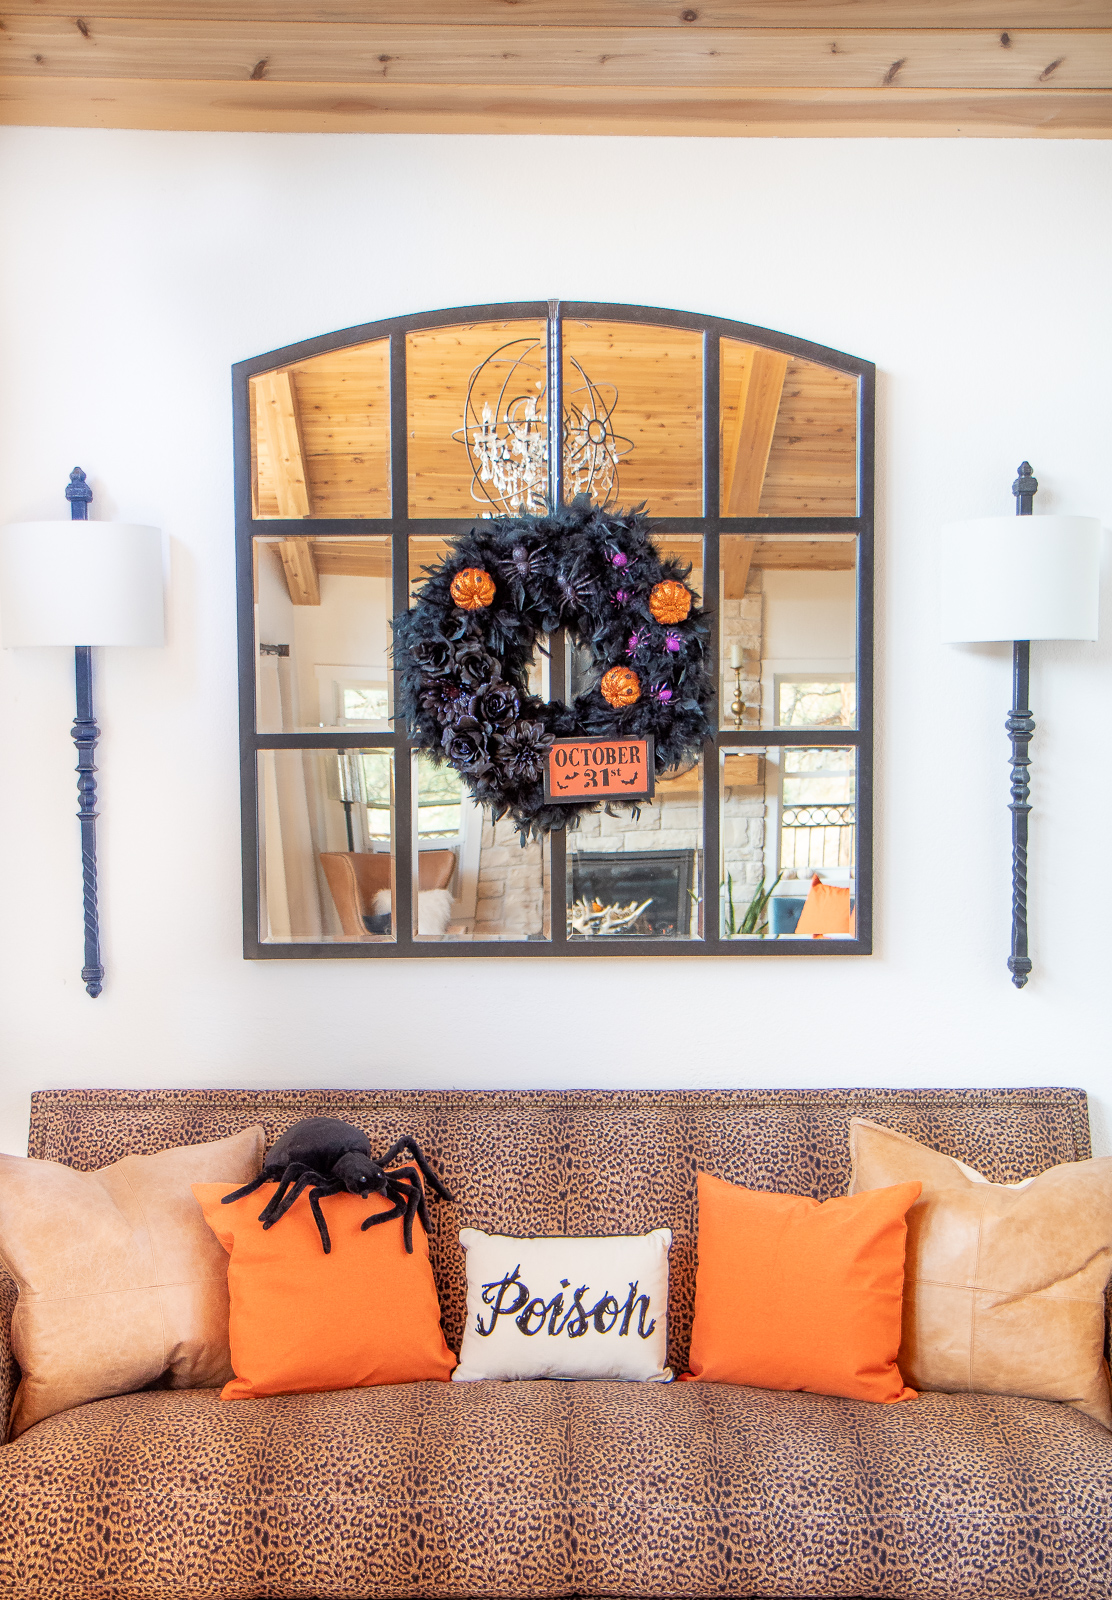 DIY Spooky-chic Halloween Wreath in 20 minutes or less